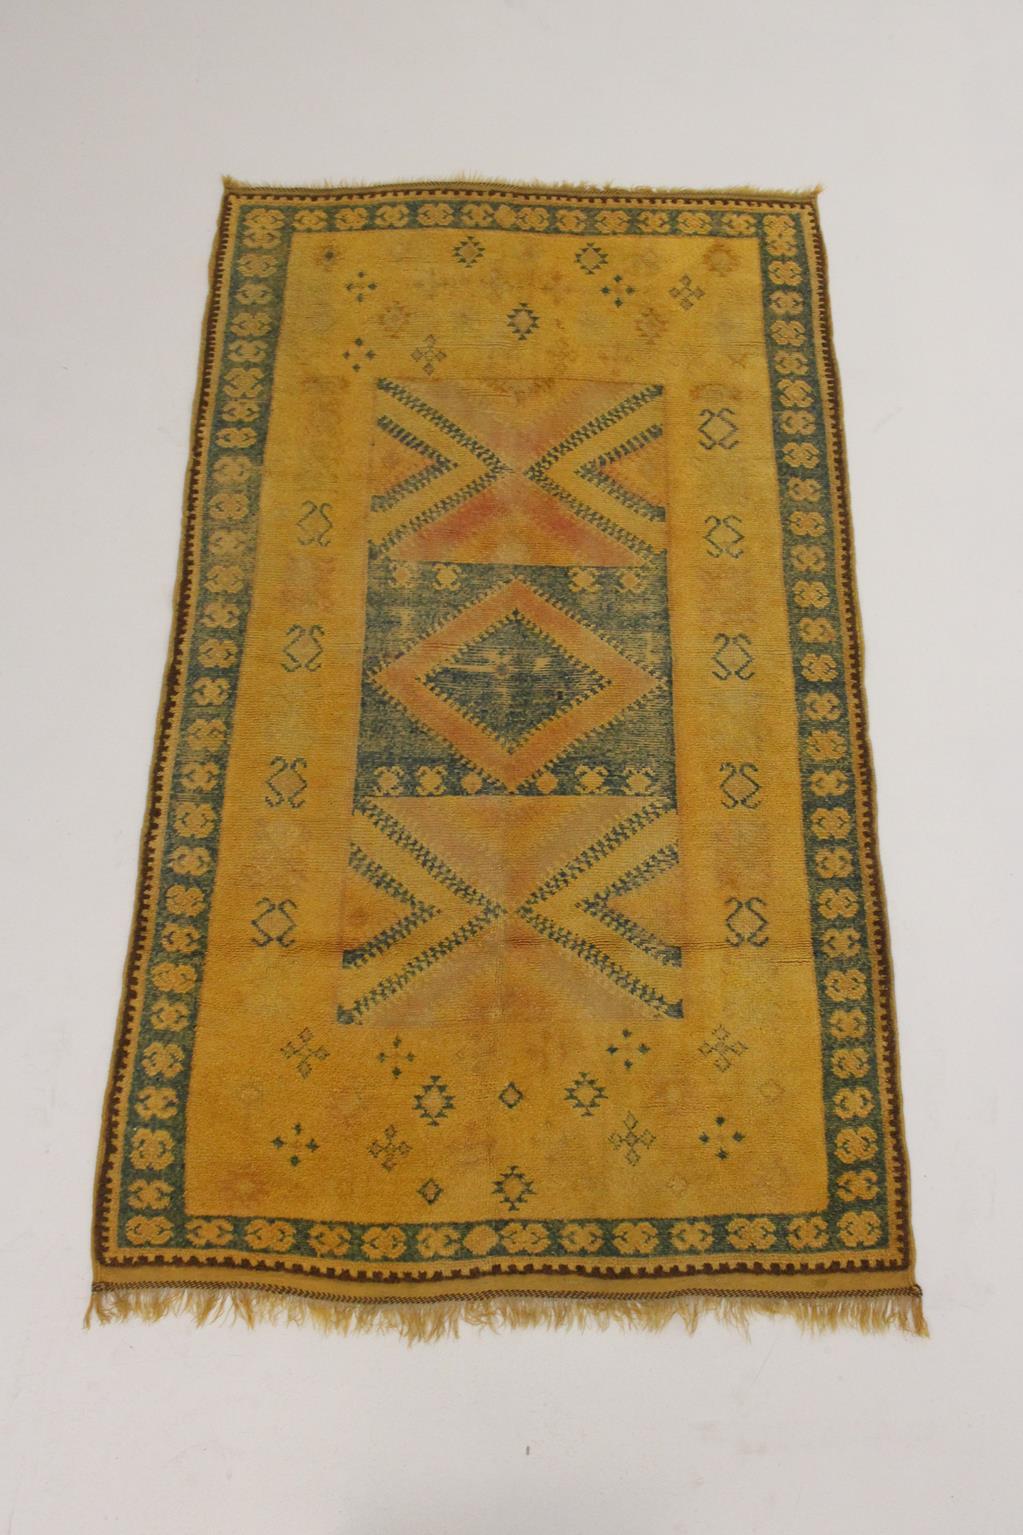 I selected this beautiful rug from piles of carpets because I have always loved a good vintage Taznakht rug with bright, saffron color. Background of this one is a natural dyied yellow with indigo blue and faded red designs (+brown borders). The